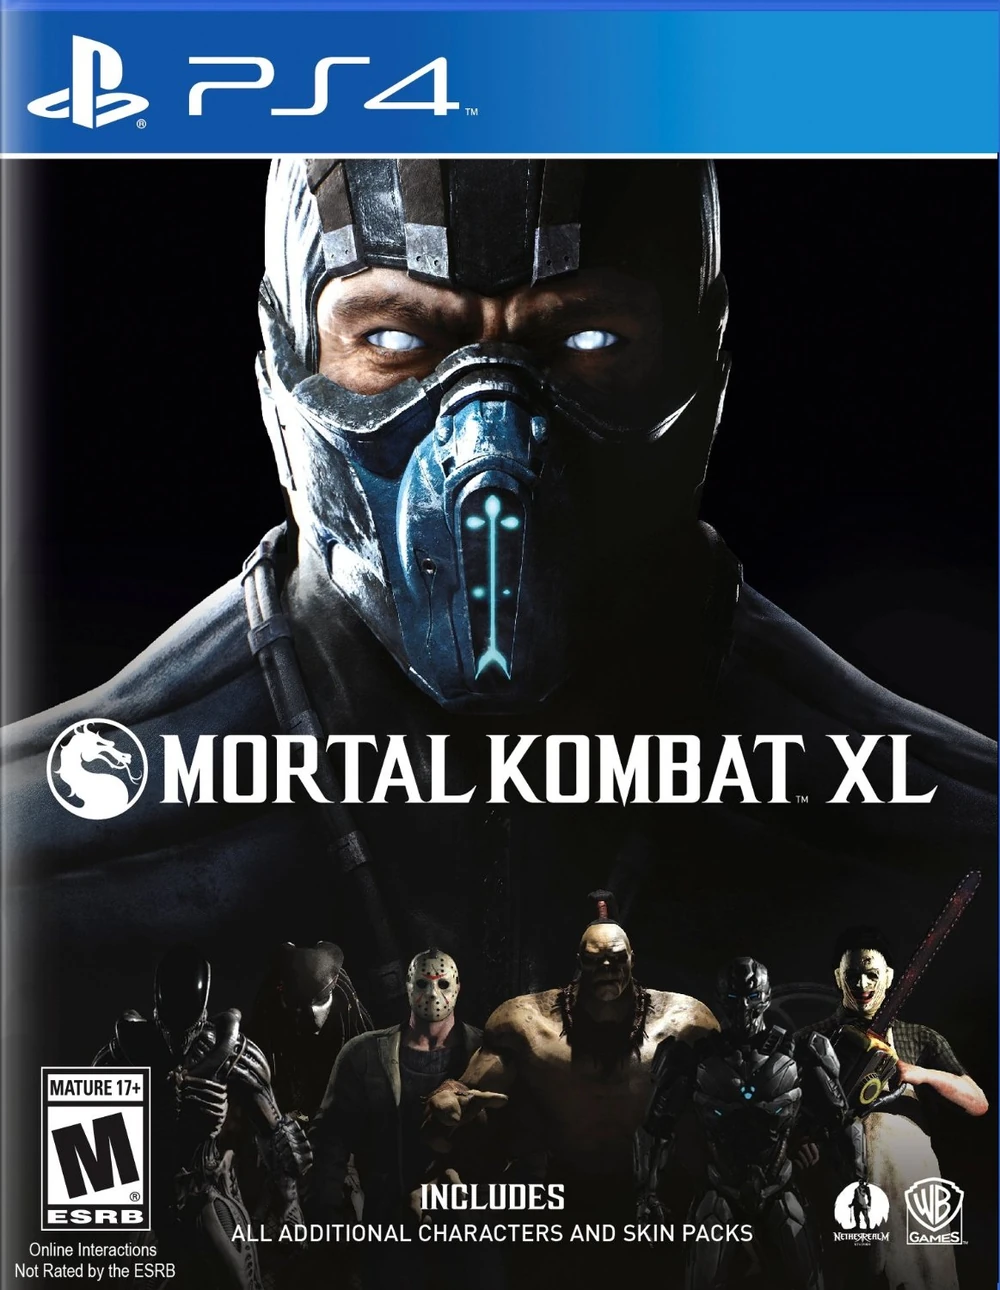 Mortal Kombat Online on X: Kano was revealed today - including a